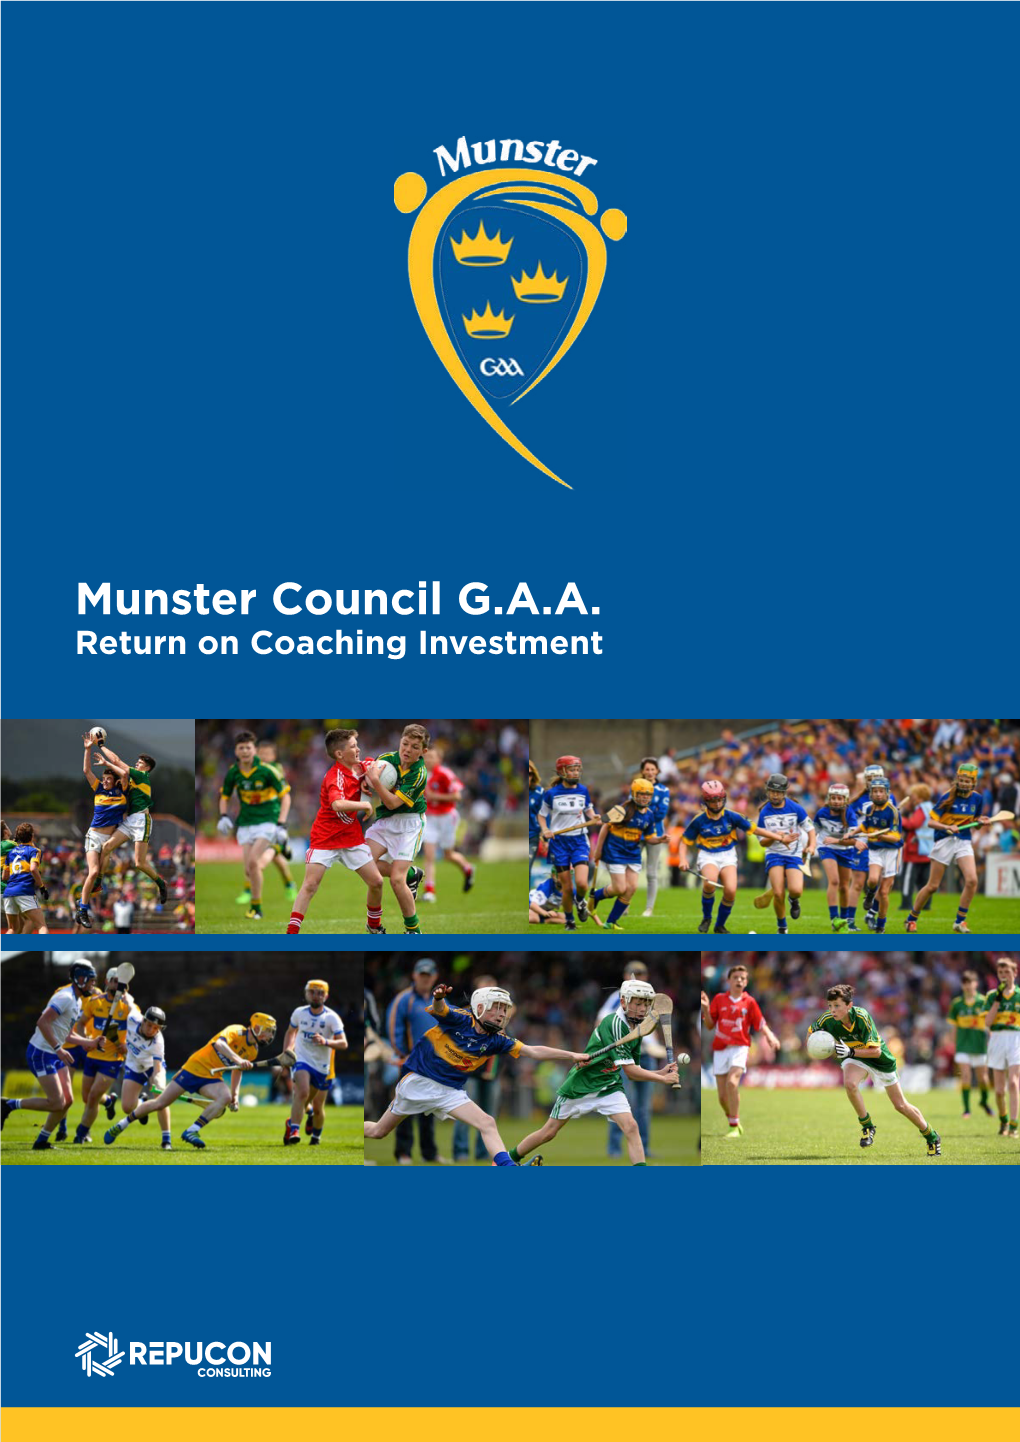 Munster Council G.A.A. Return on Coaching Investment